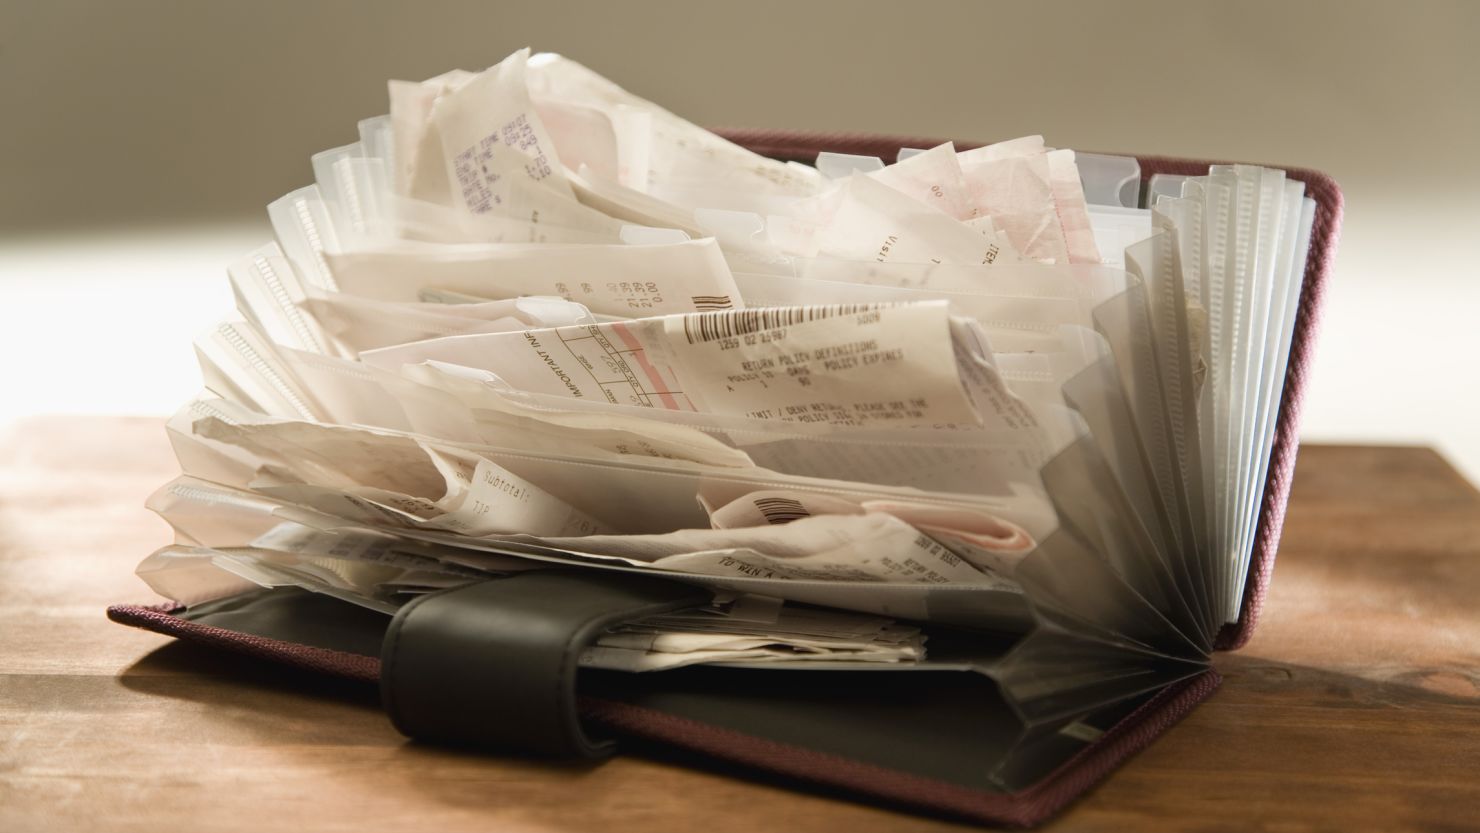 Expense account fraud can usually be discovered in the paper trail, like phony receipts.